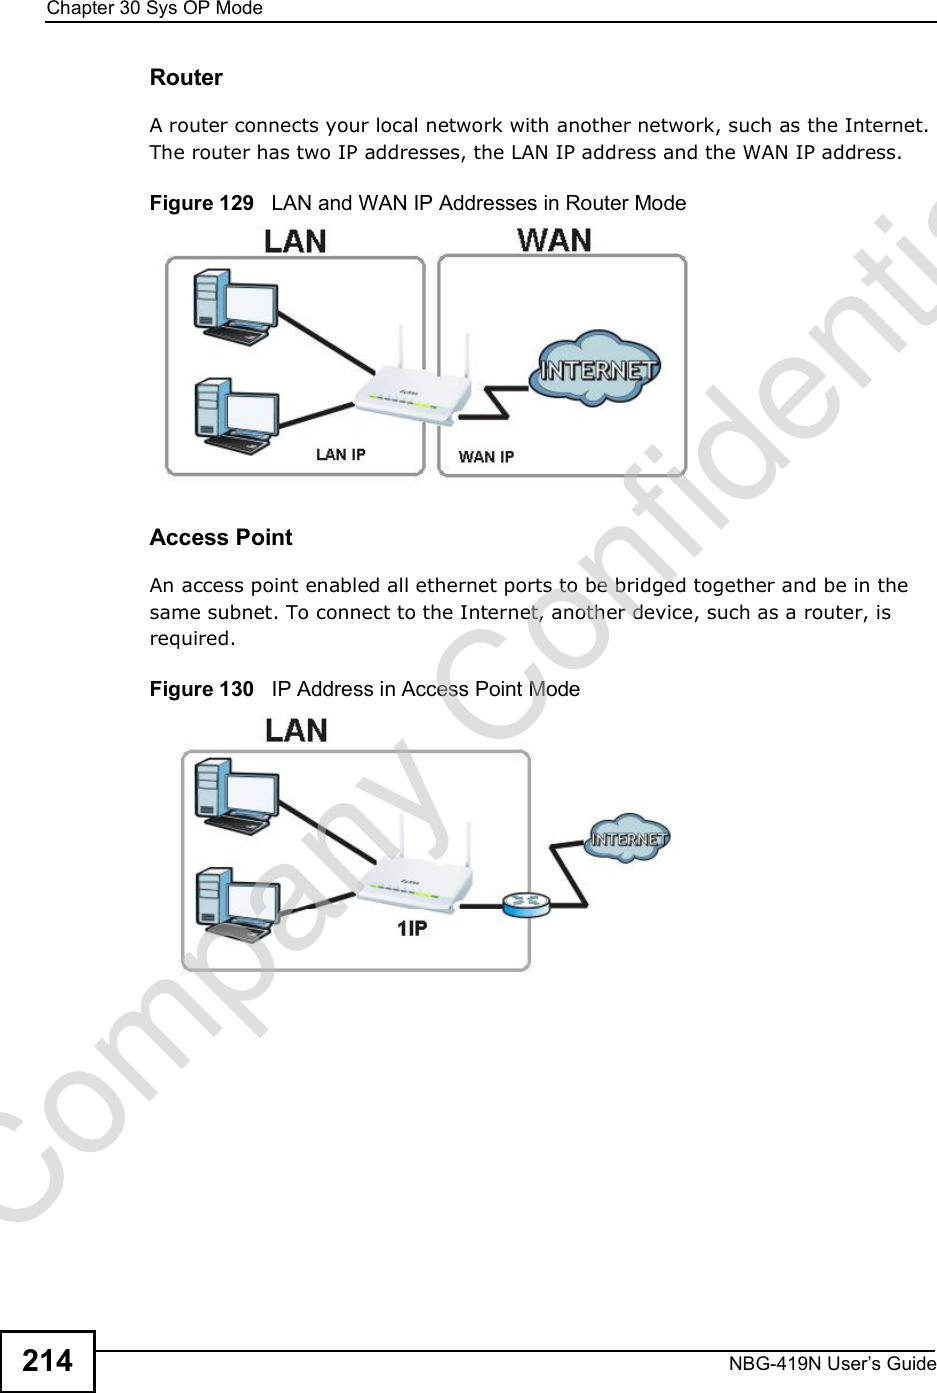 Chapter 30Sys OP ModeNBG-419N User s Guide214RouterA router connects your local network with another network, such as the Internet. The router has two IP addresses, the LAN IP address and the WAN IP address.Figure 129   LAN and WAN IP Addresses in Router ModeAccess PointAn access point enabled all ethernet ports to be bridged together and be in the same subnet. To connect to the Internet, another device, such as a router, is required.Figure 130   IP Address in Access Point ModeCompany Confidential